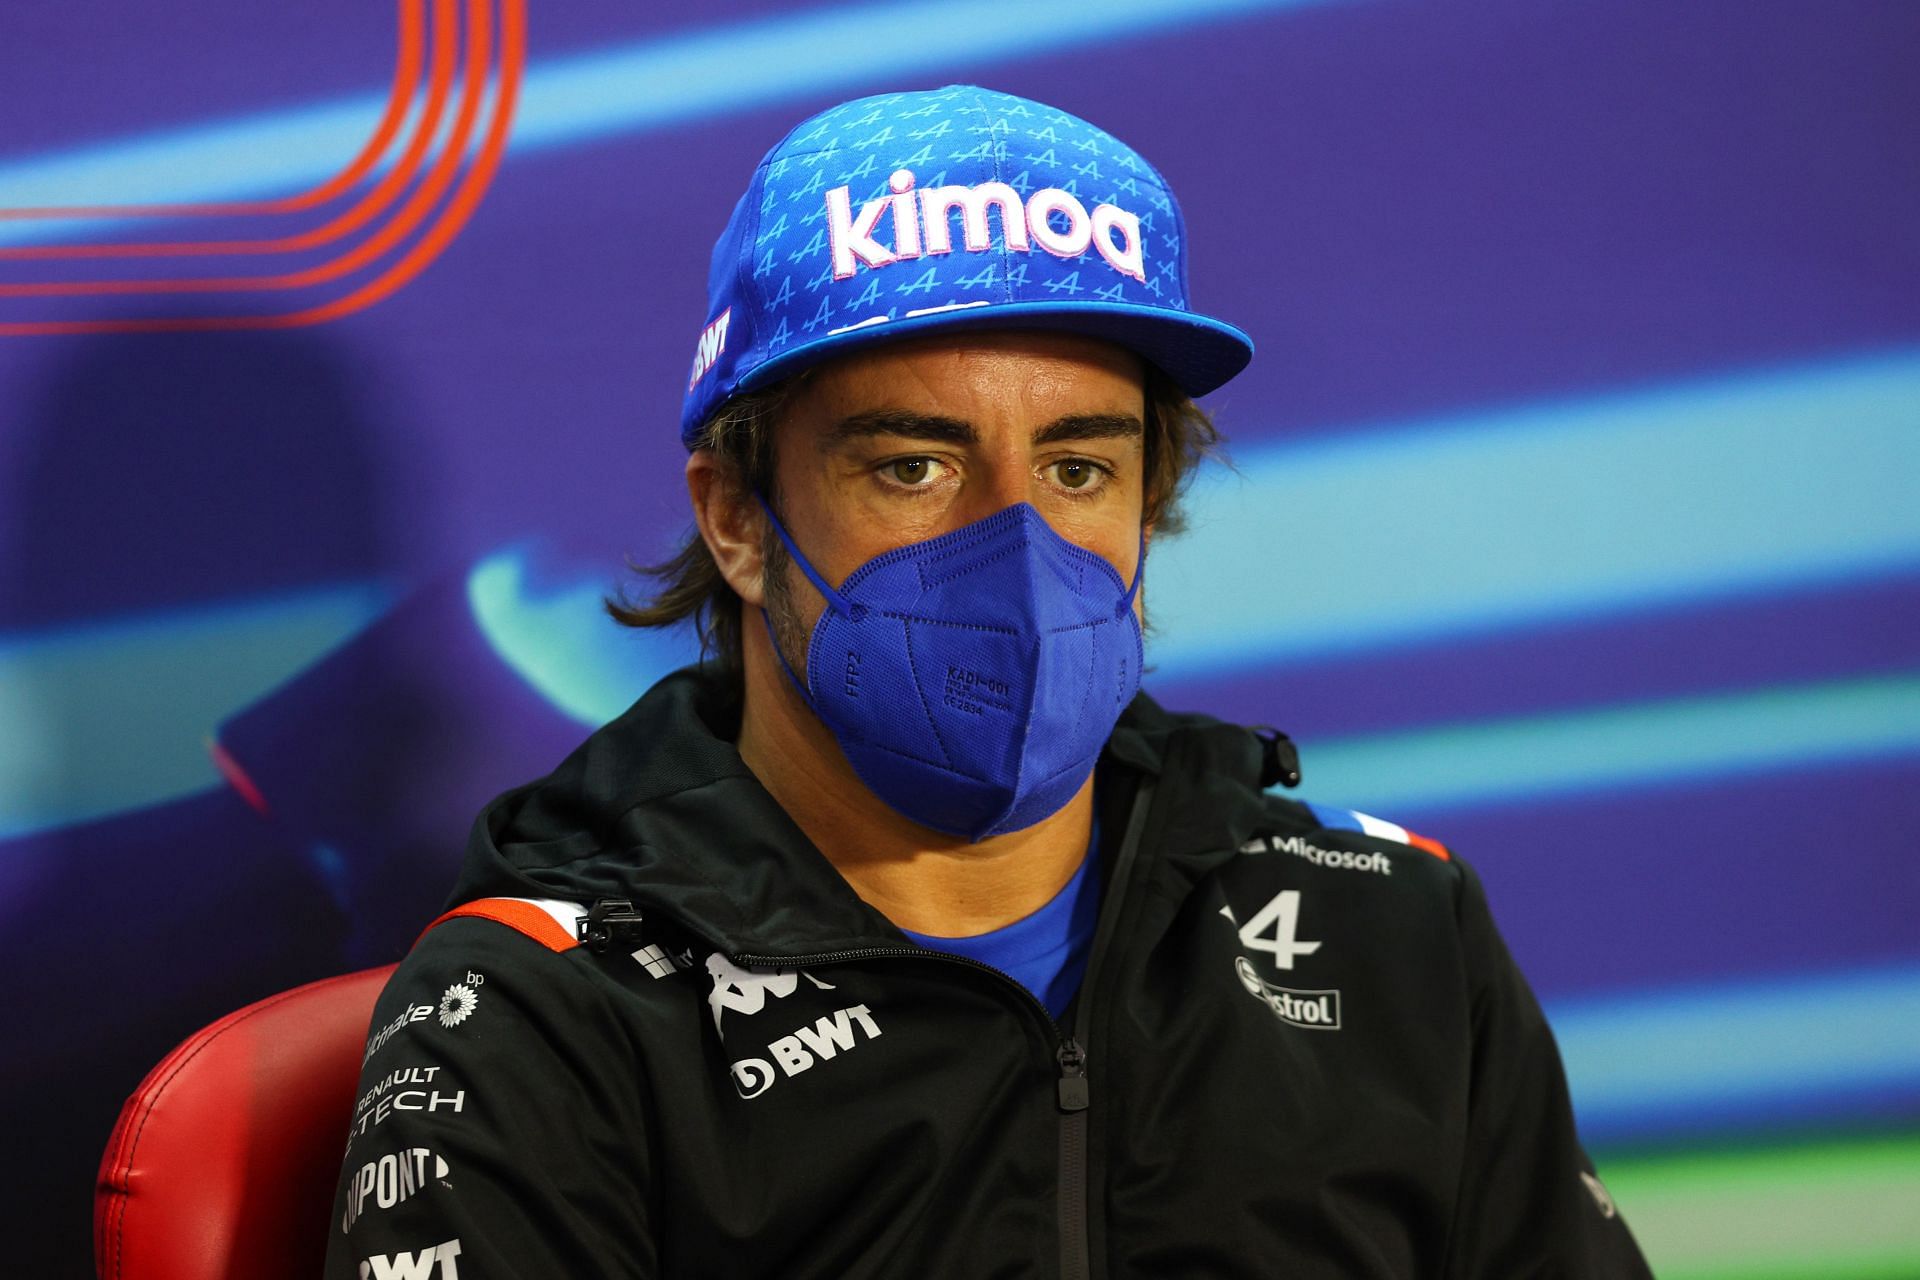 F1 Grand Prix of Bahrain - Practice - Fernando Alonso during a press conference